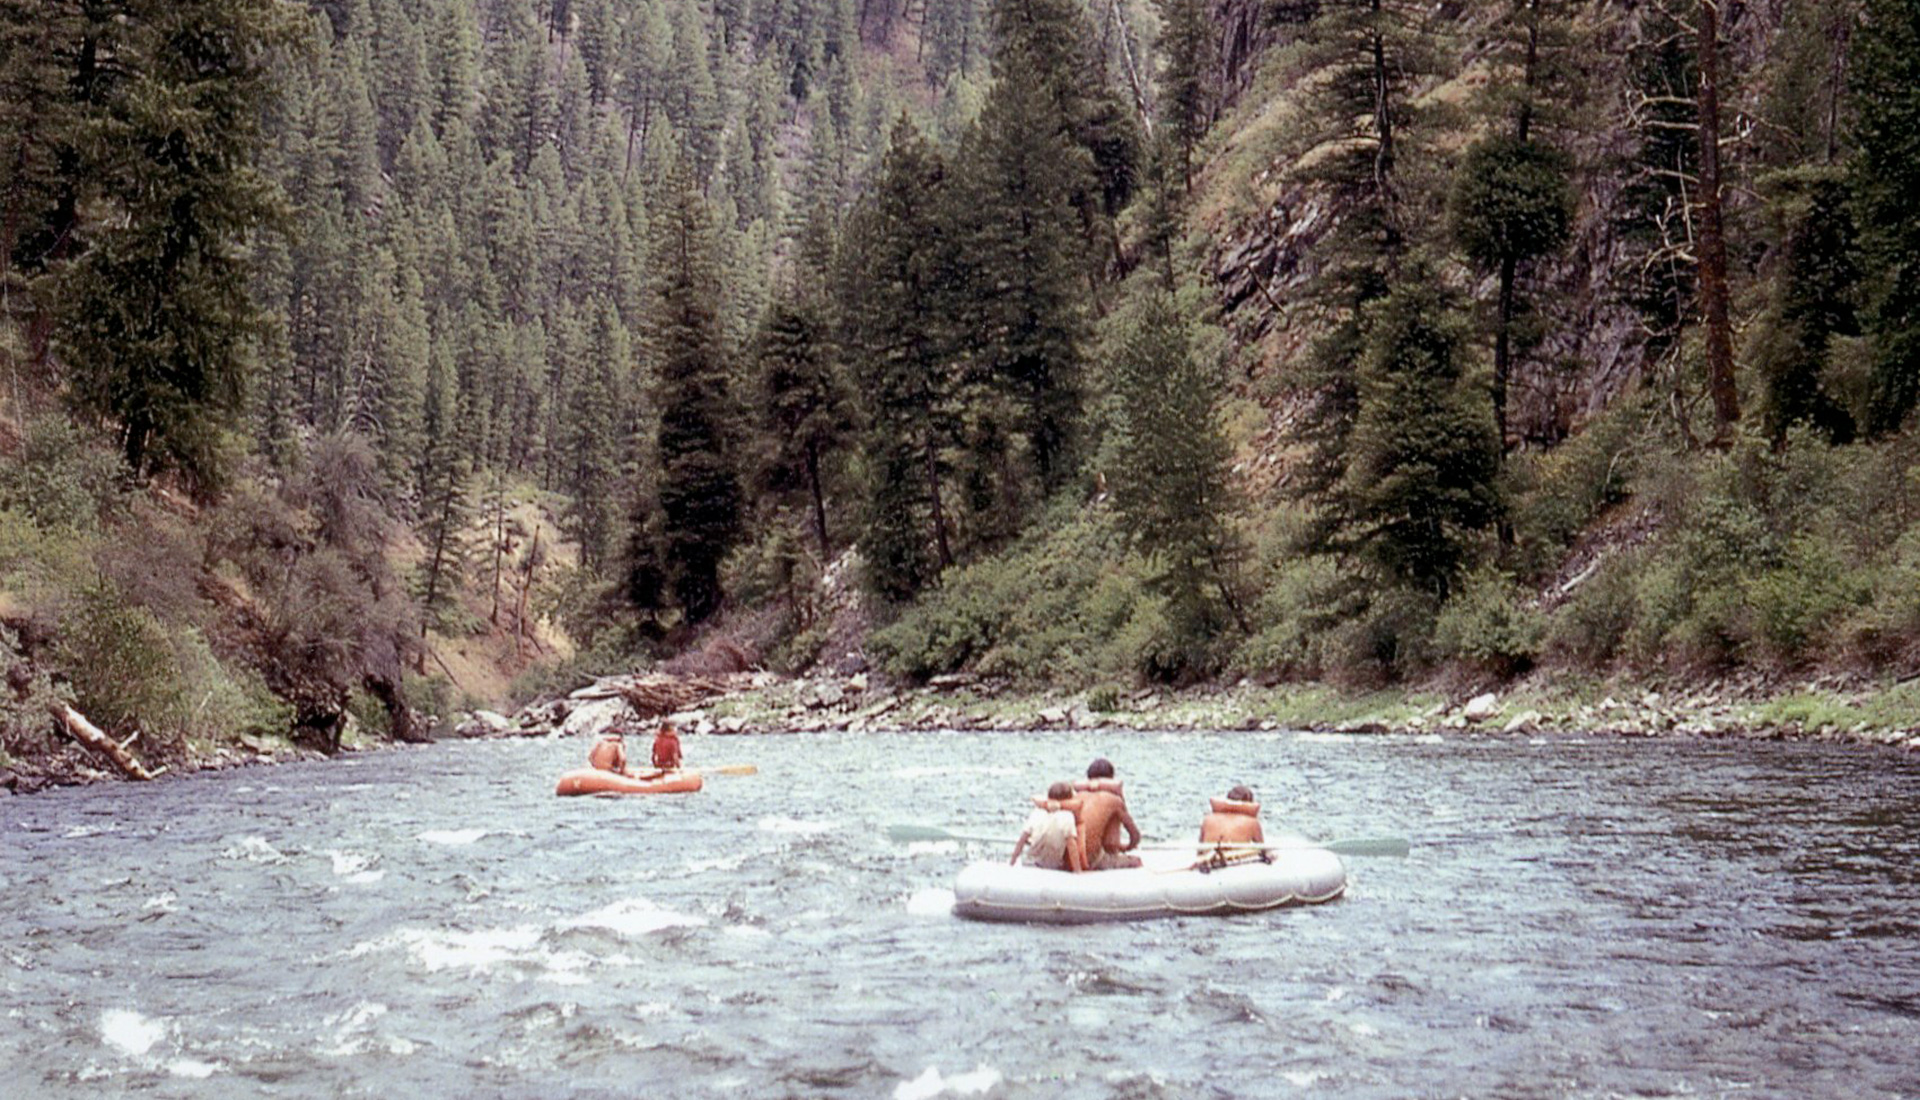 Armstrong Family Rafting Trip on the Middle Fork of the Salmon - 1969